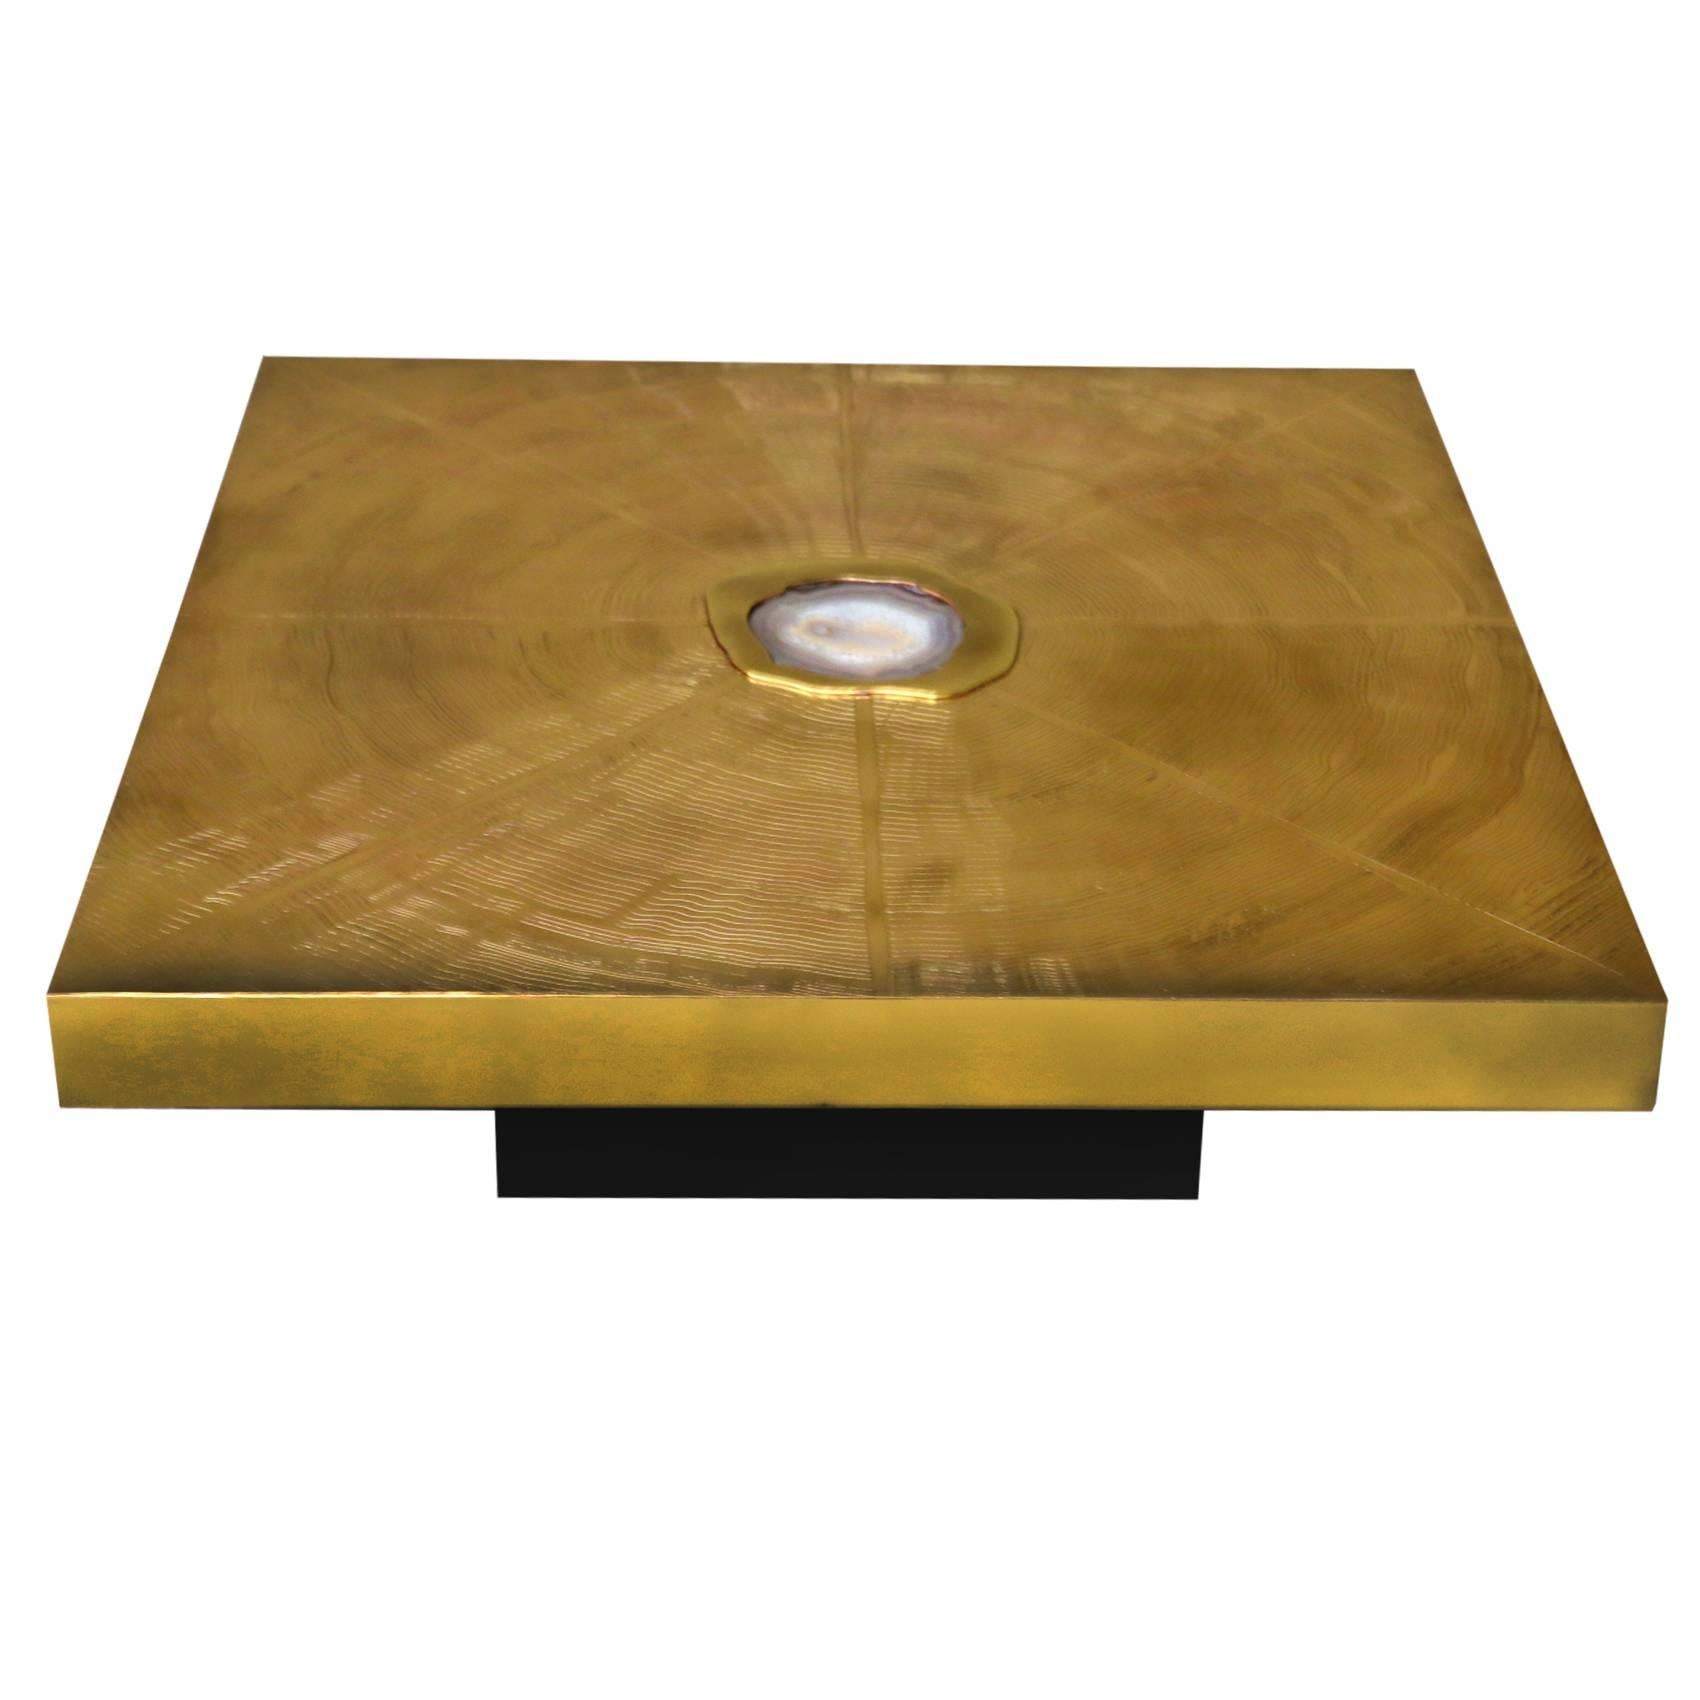 Signed brass Acid Etched and Agate Inset coffee table made in Belgium 